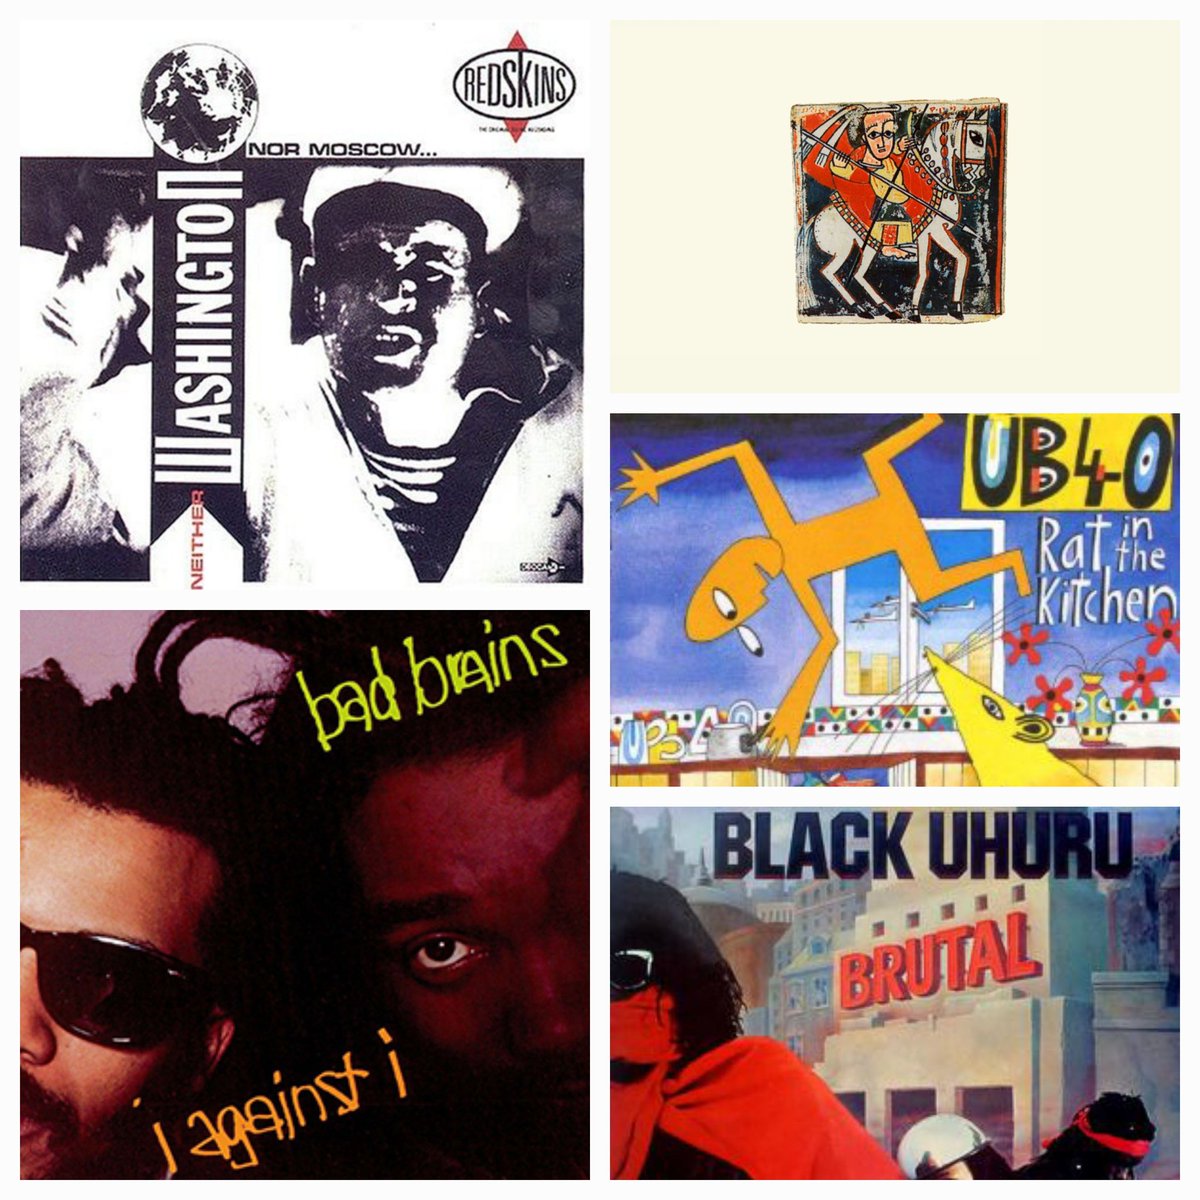 Morning @RichardS7370 ,all. Jeezo , i forgot it was this weekend ! Anyway,  heres my #5albums86
1, The Redskins; neither etc ✊🏼
2, Black Uhuru;brutal
3,UB40: rat in the kitchen
4,Bad Brains; I against I 
5,Paul Simon; Gracelands